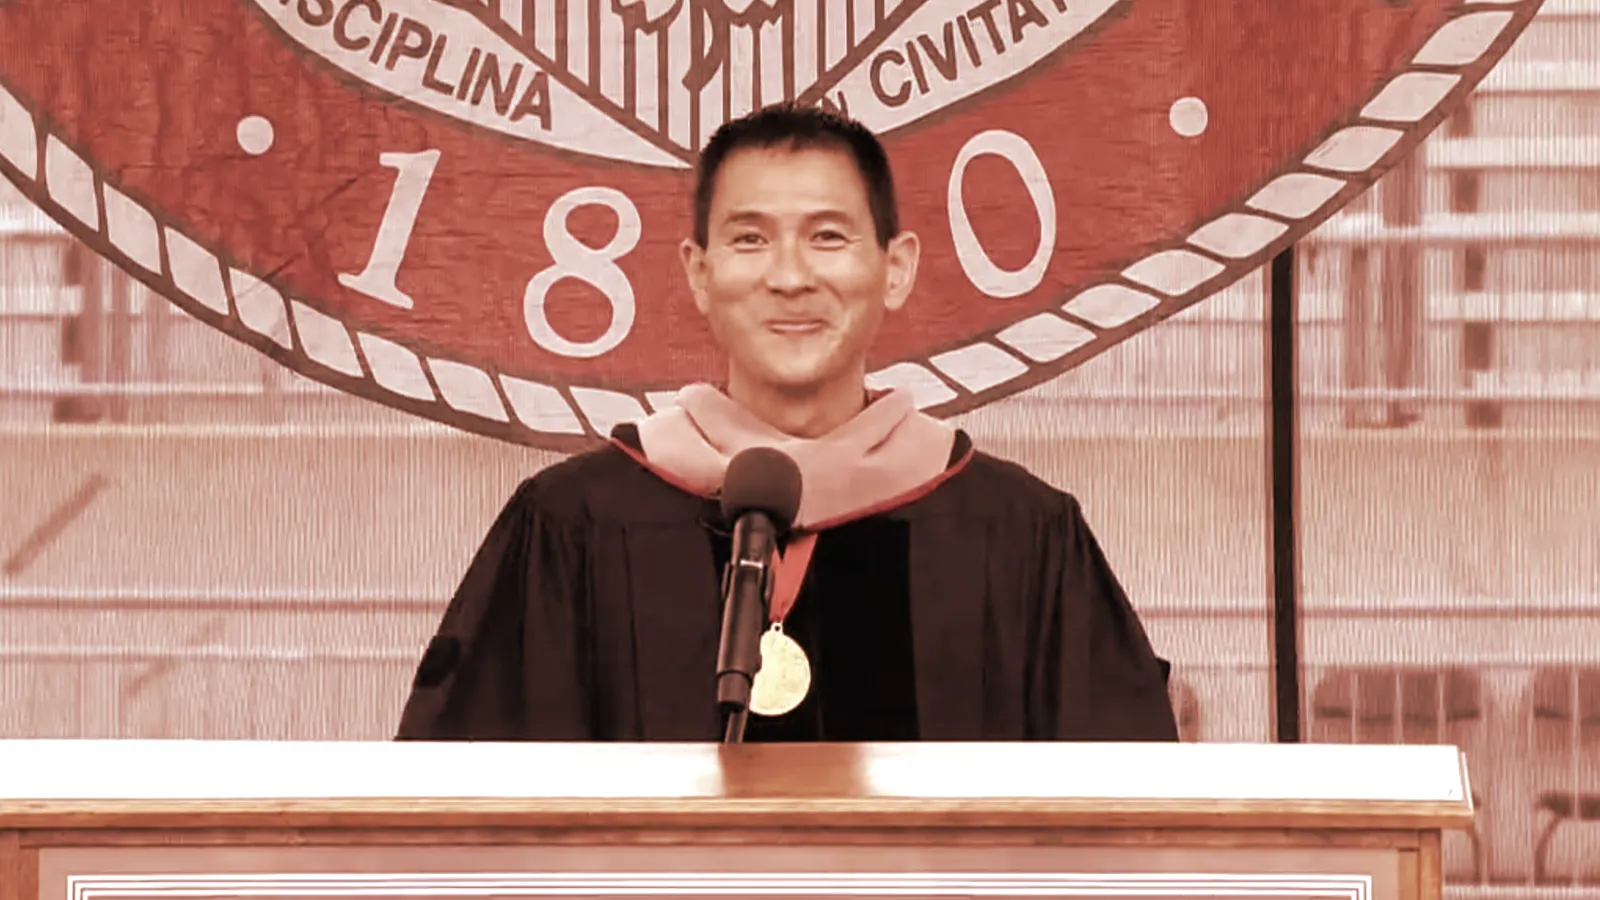 Chris Pan appeared grateful to be the OSU commencement speaker. Image: OSU